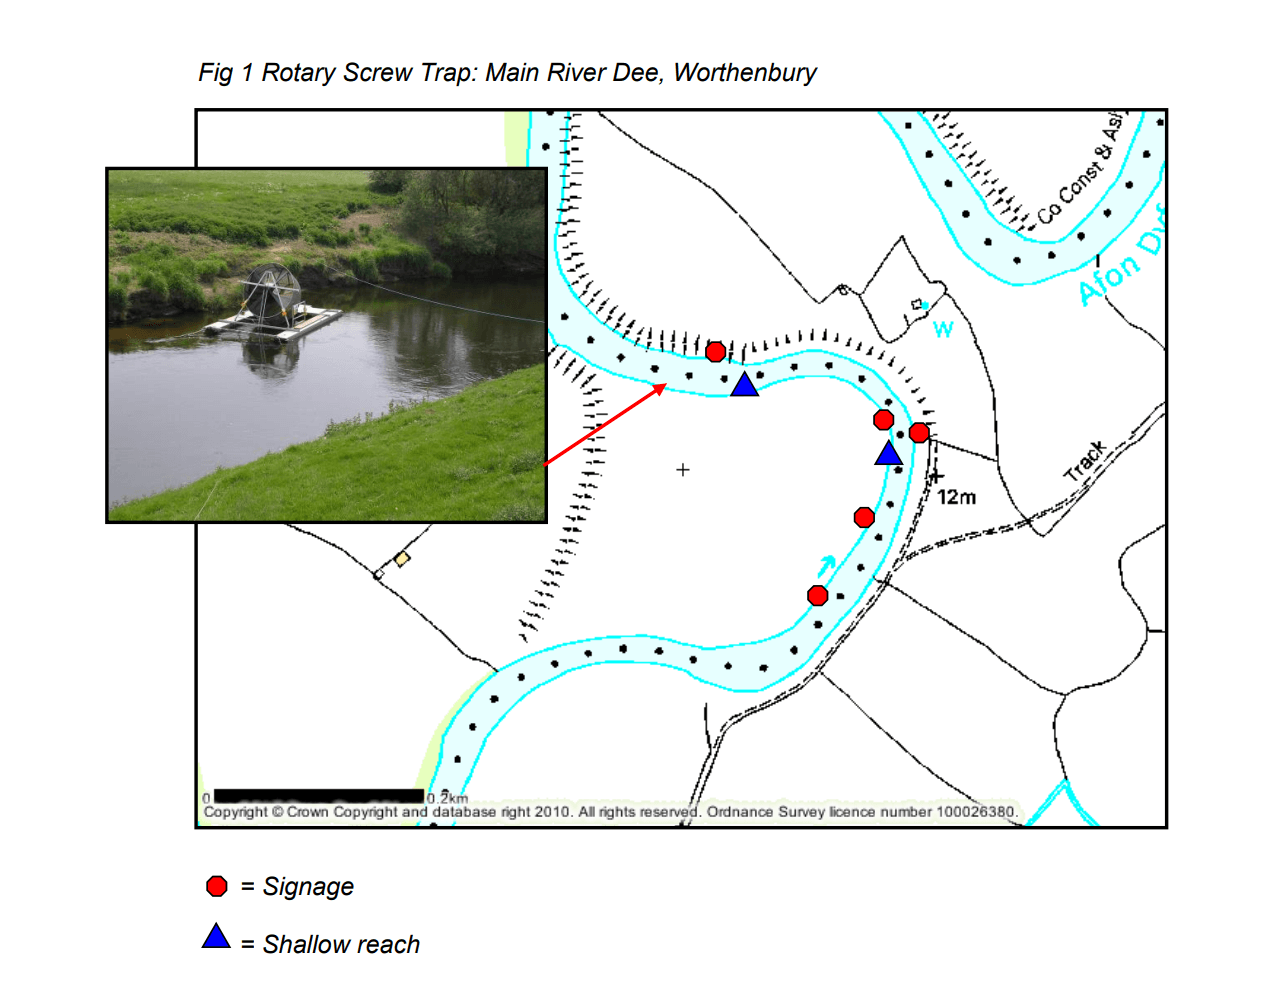 Diagram and photo of fish trap on the River Dee